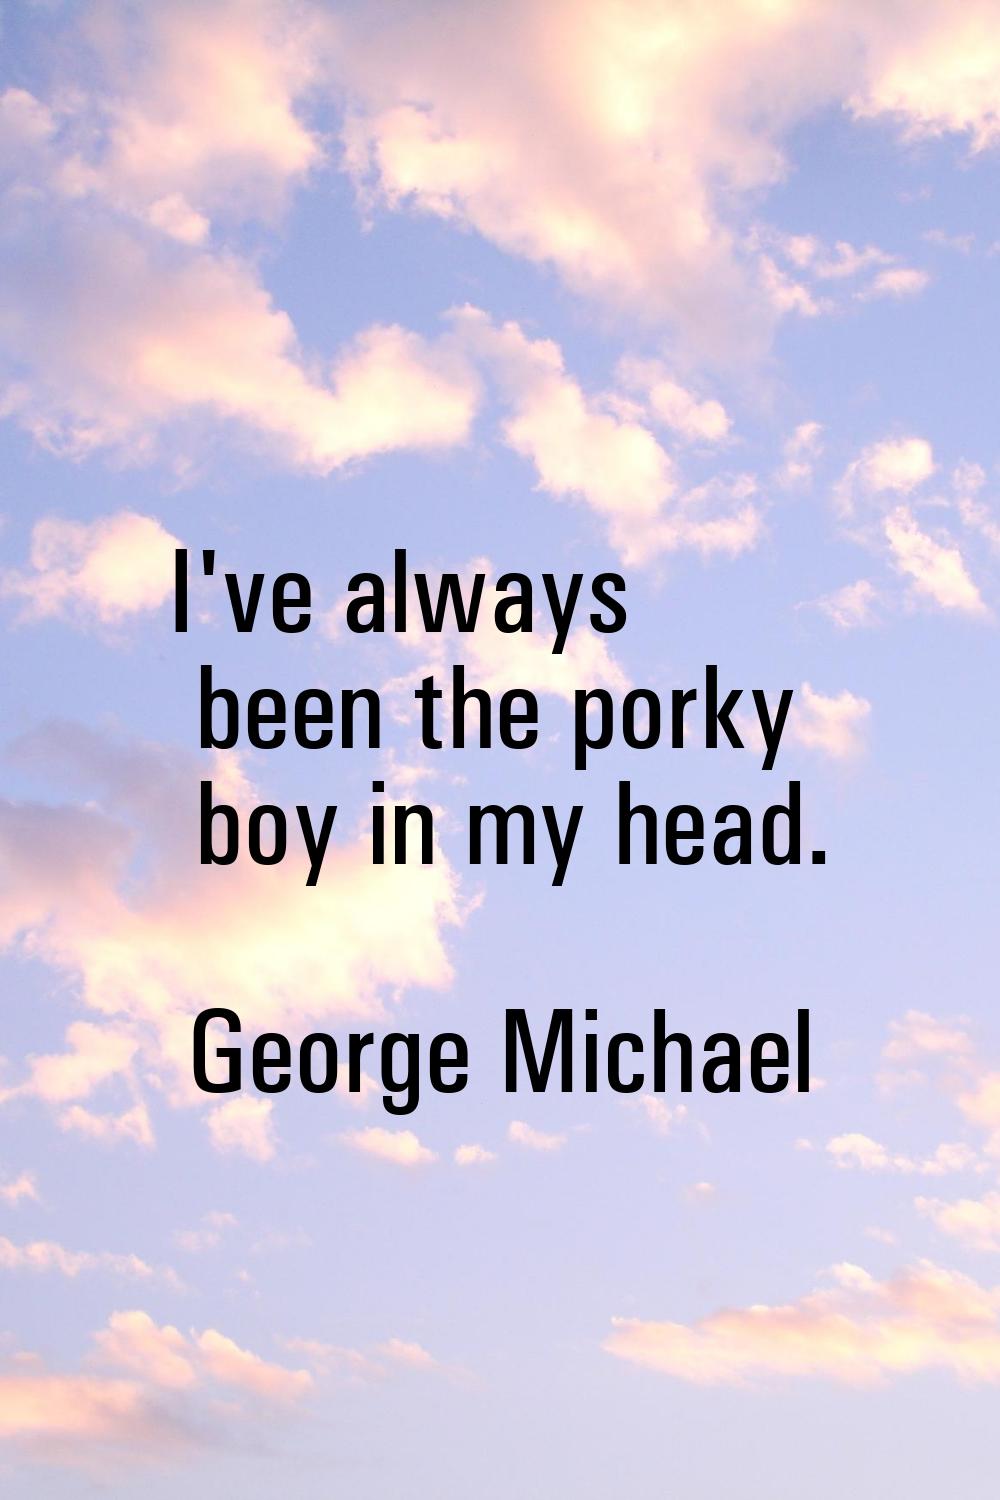 I've always been the porky boy in my head.